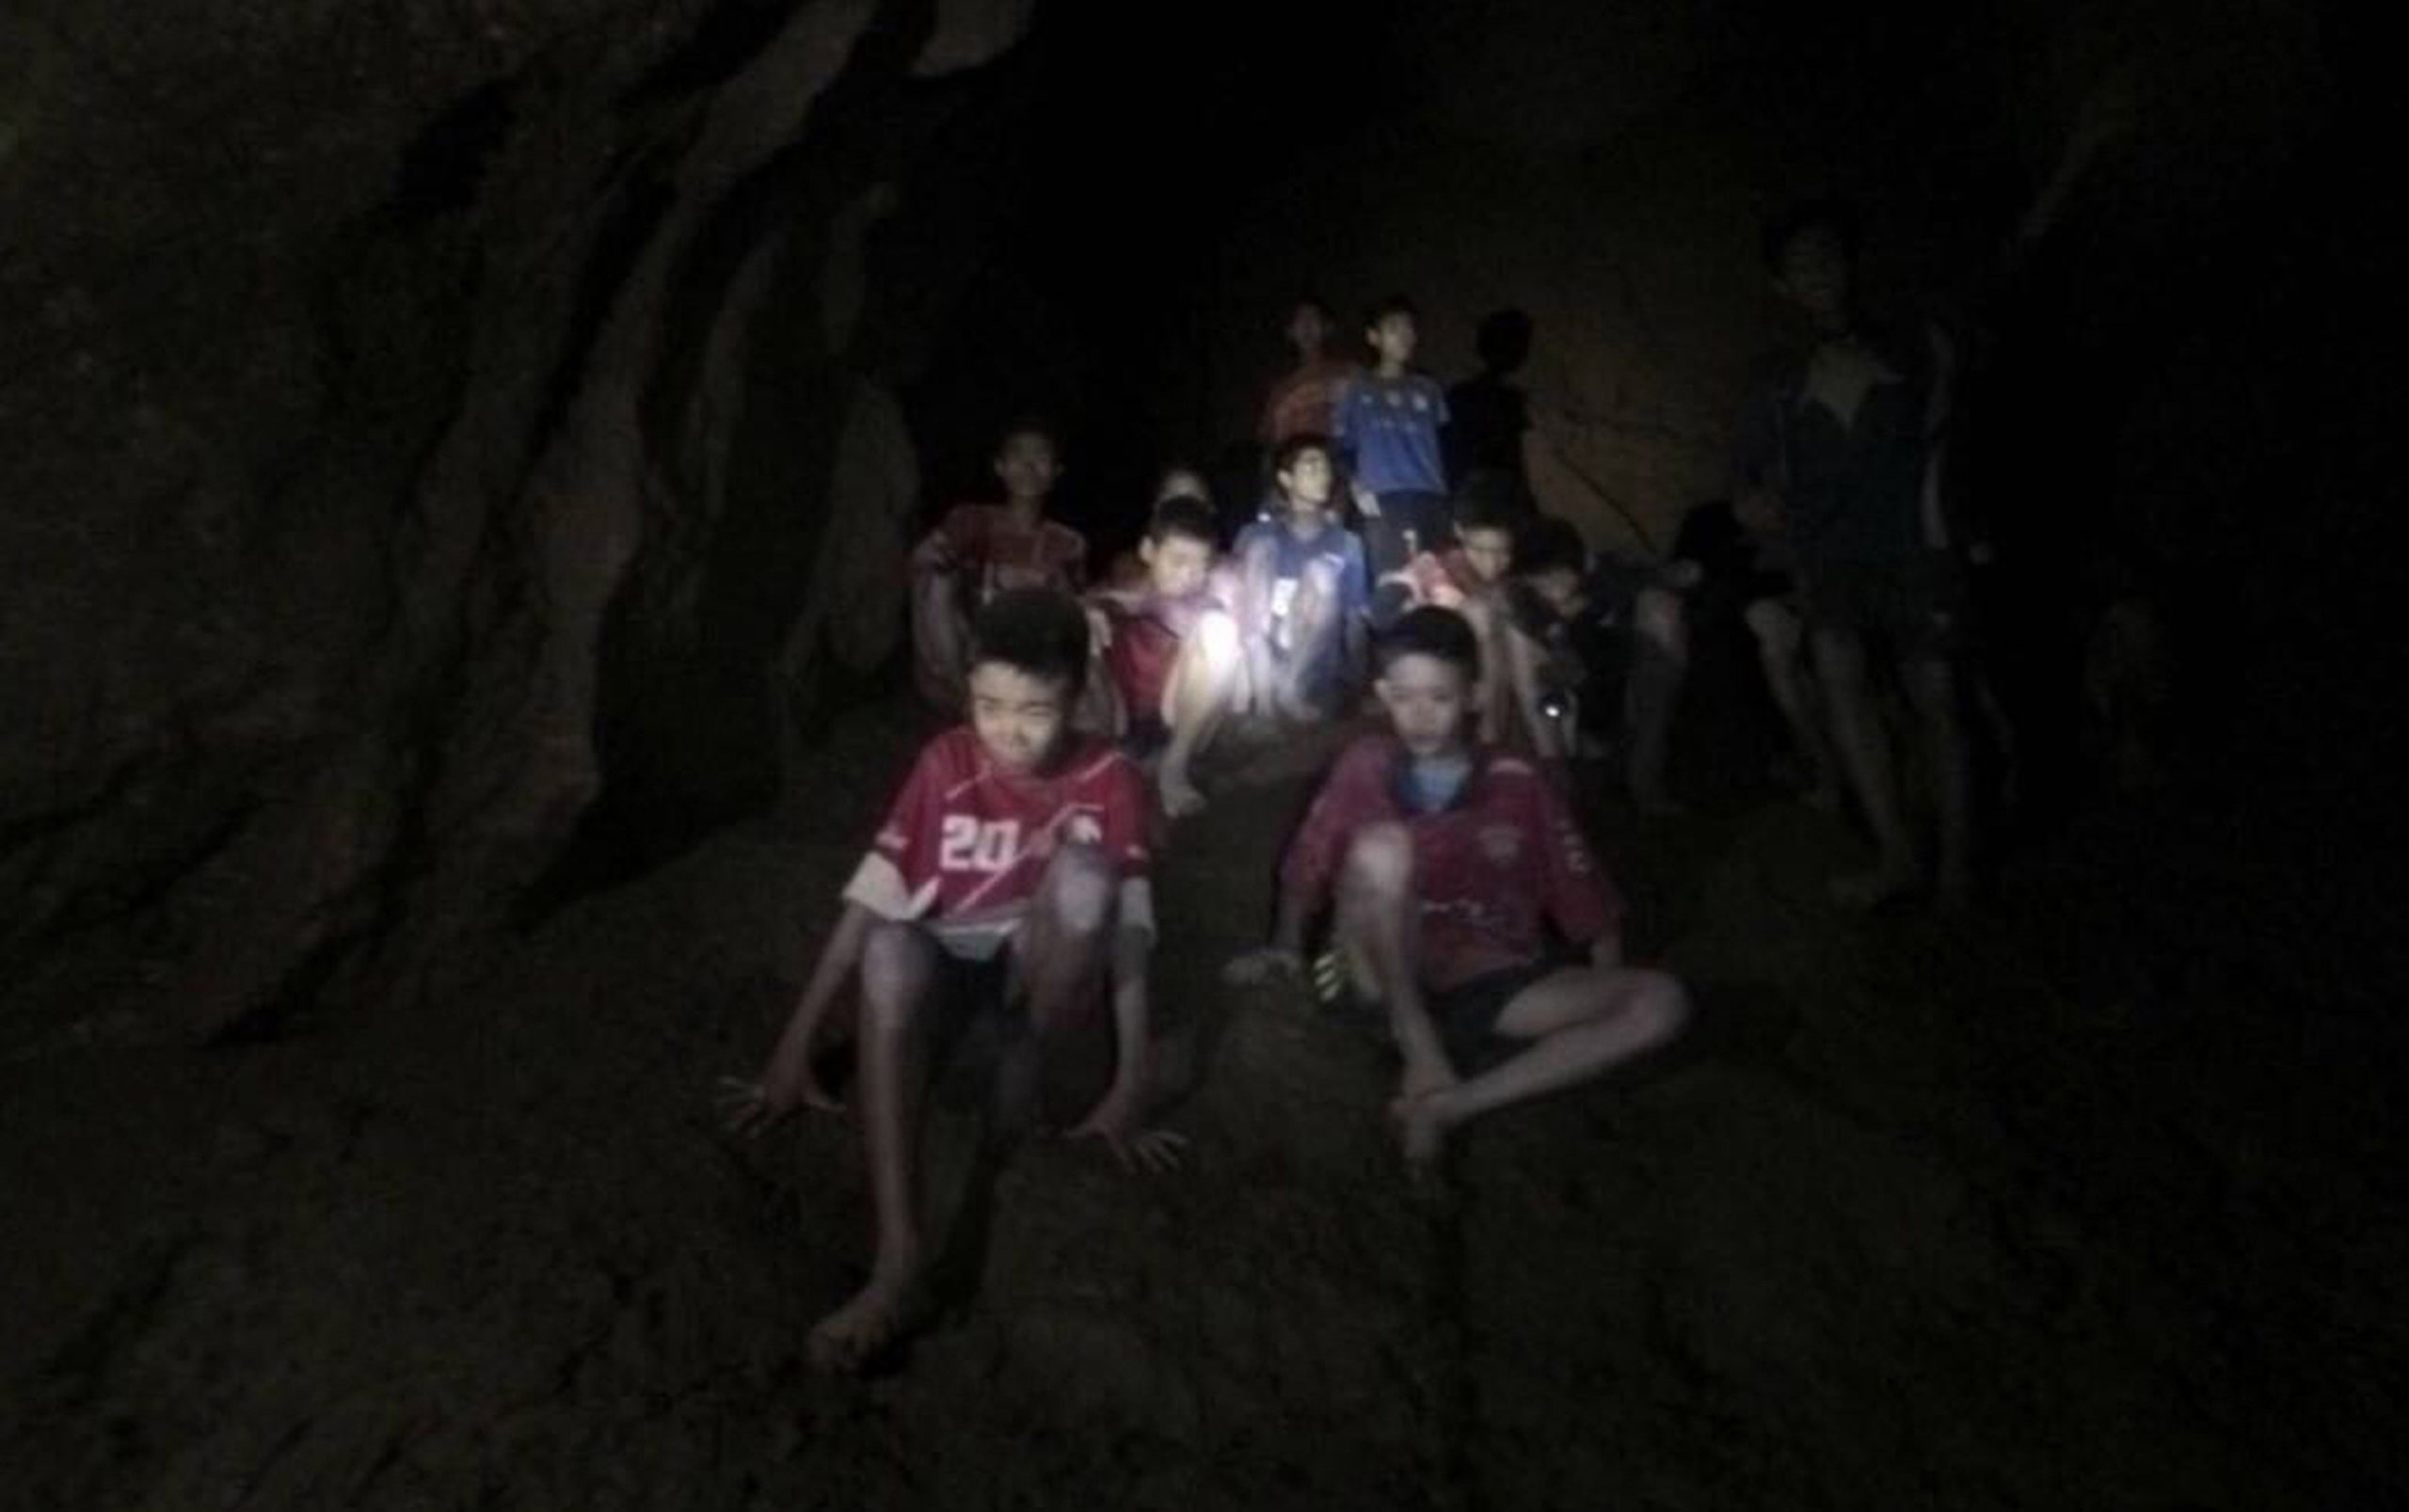 Threat Of Heavy Rains Could Force Emergency Evacuation Of Boys Trapped In Thai Cave